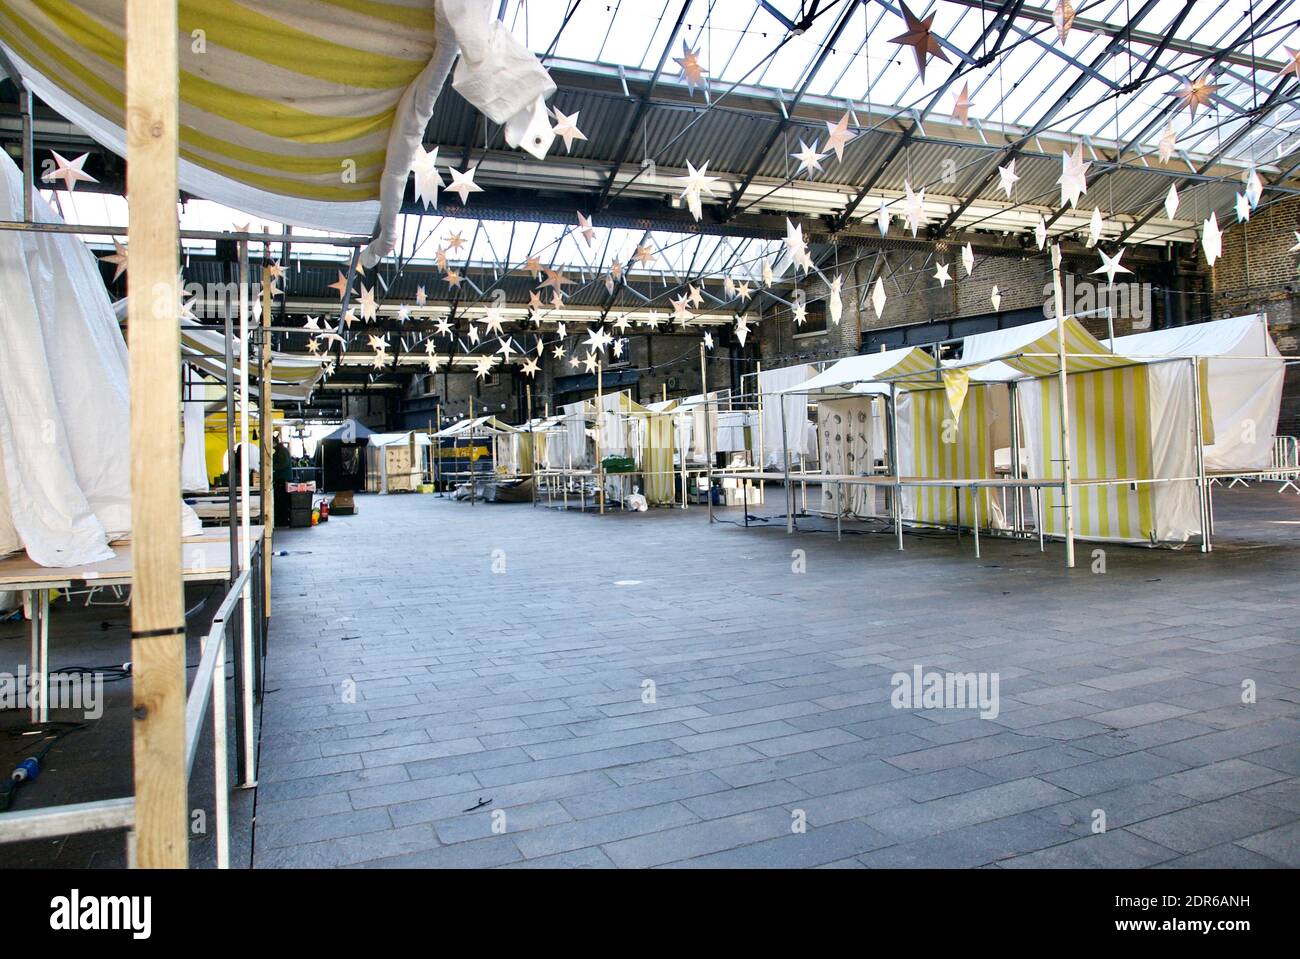 First day of Tier 4 covid19 restrictions in London closed this food market. Retail and non-essential businesses closed. Canopy Market, Coal Drops Yard Stock Photo